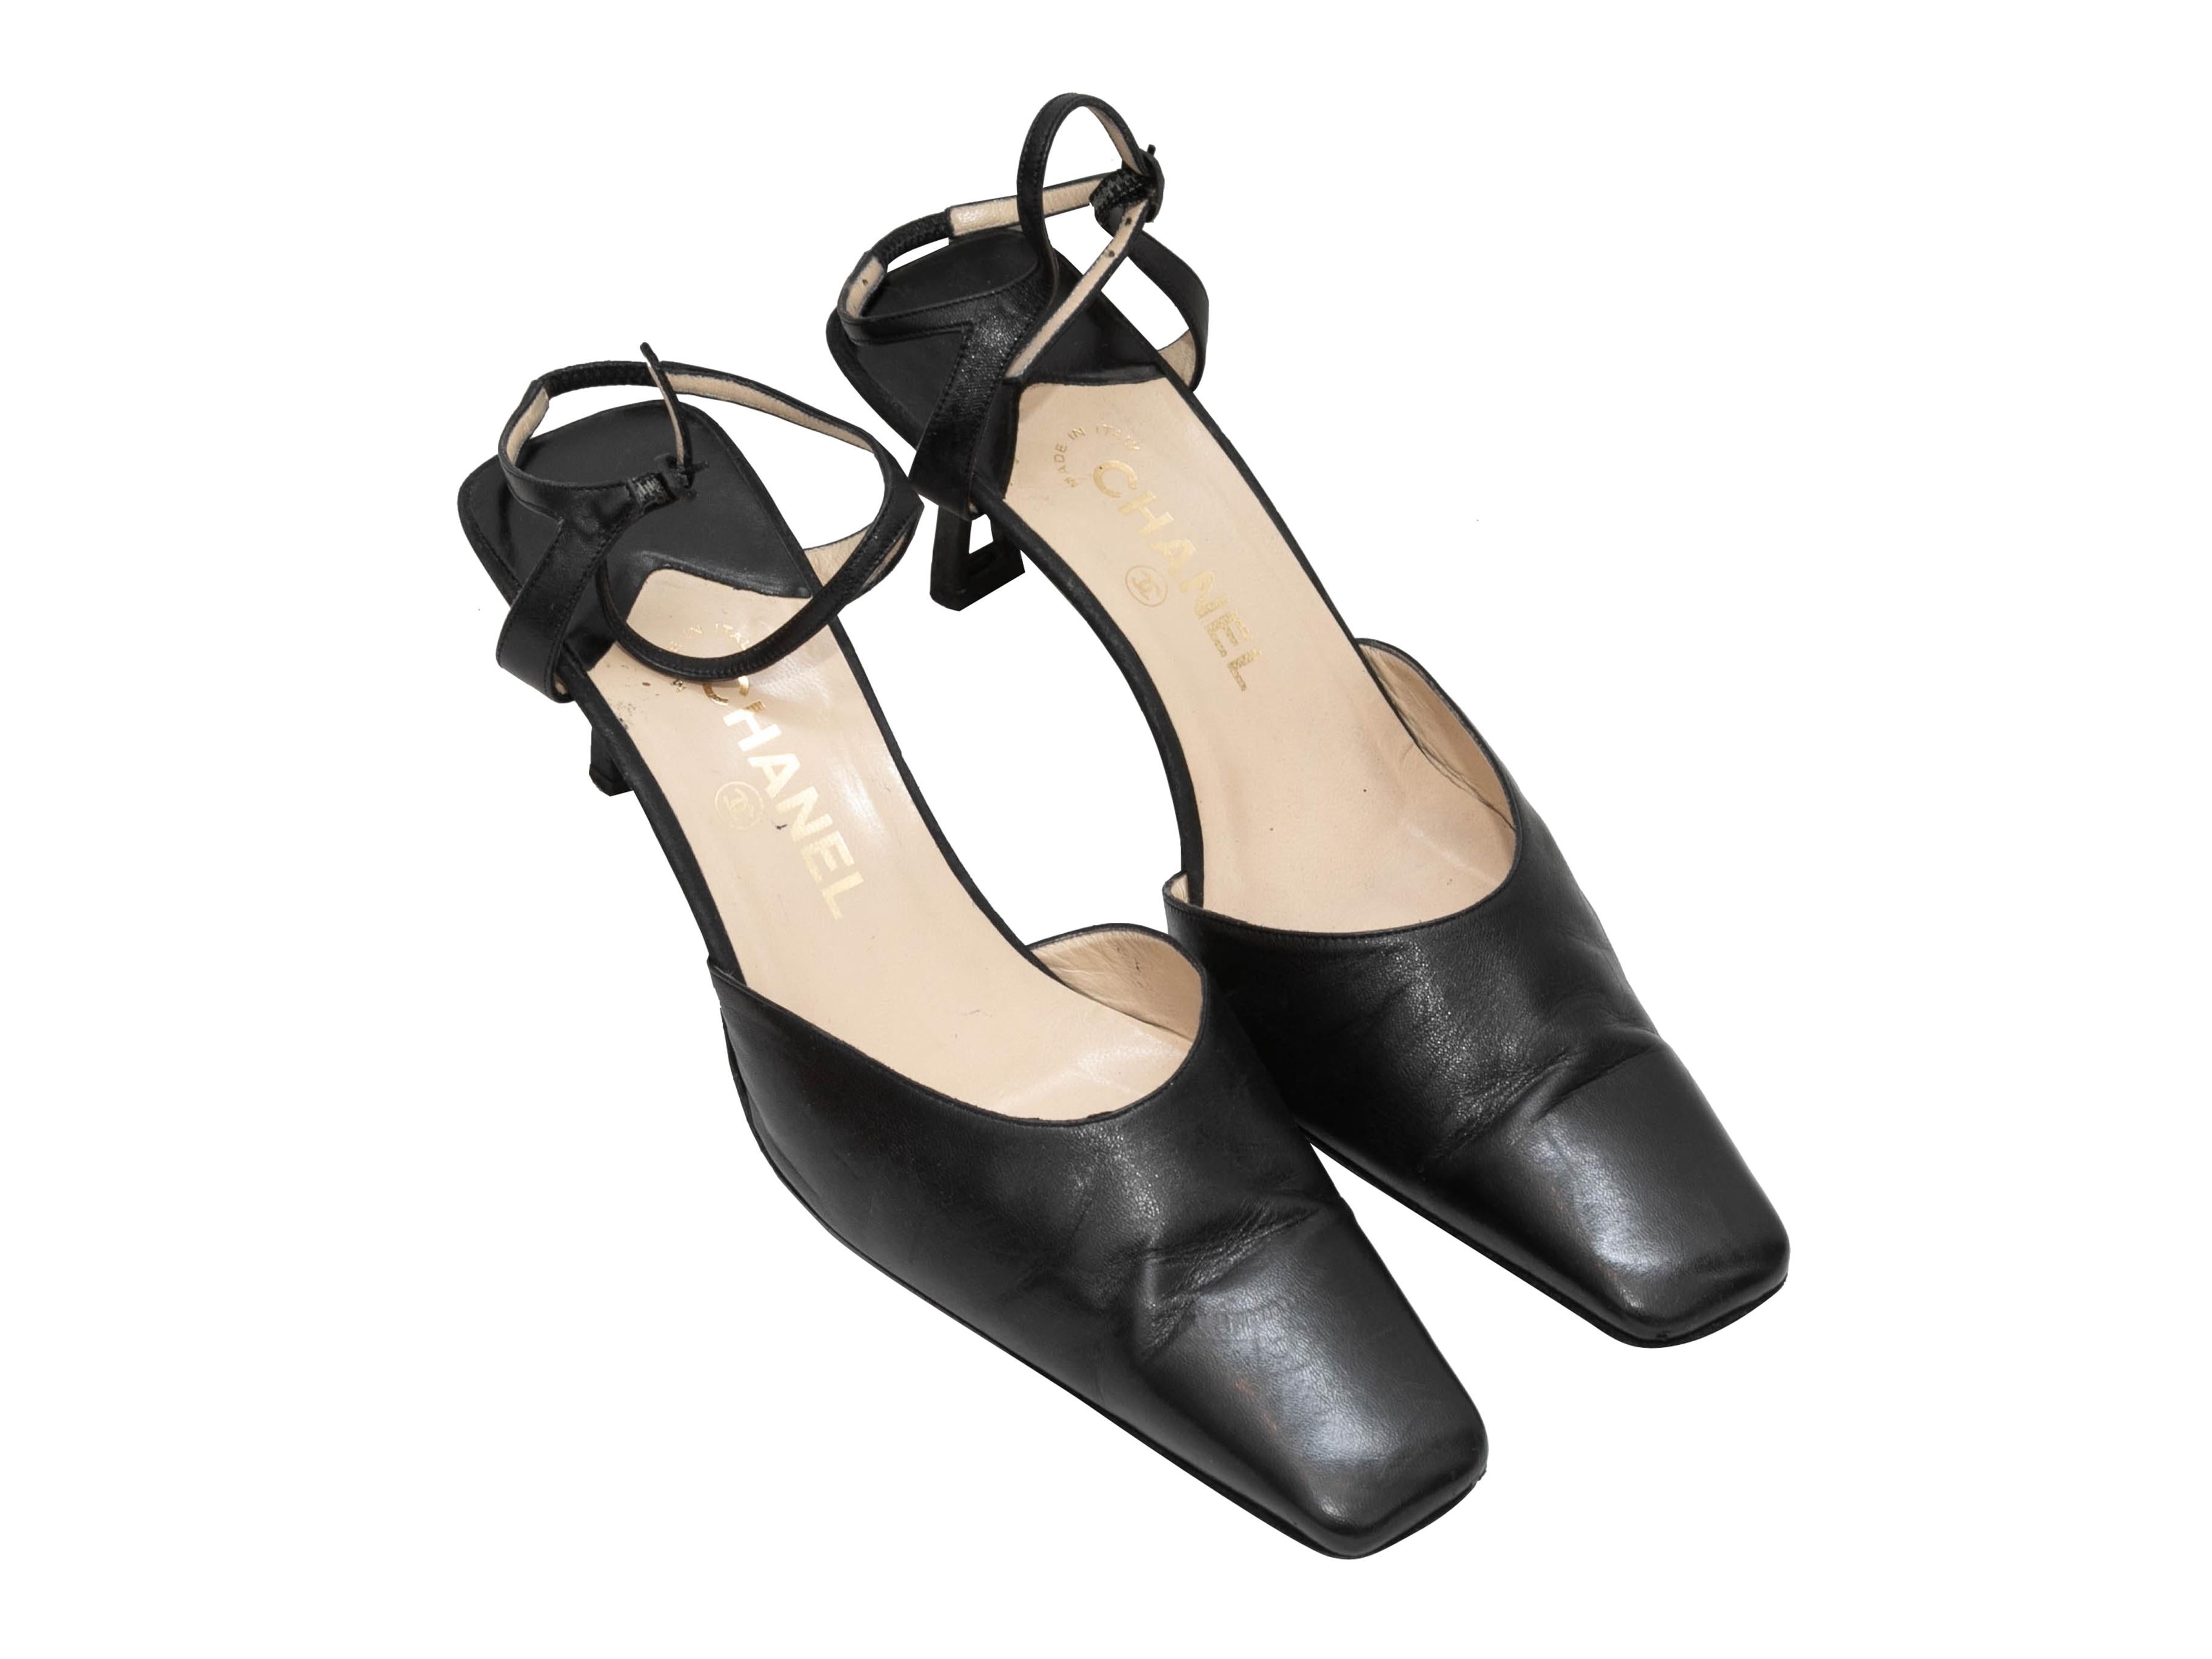 Vintage black leather square-toe heels by Chanel. Buckle closures at ankle straps. 2.5